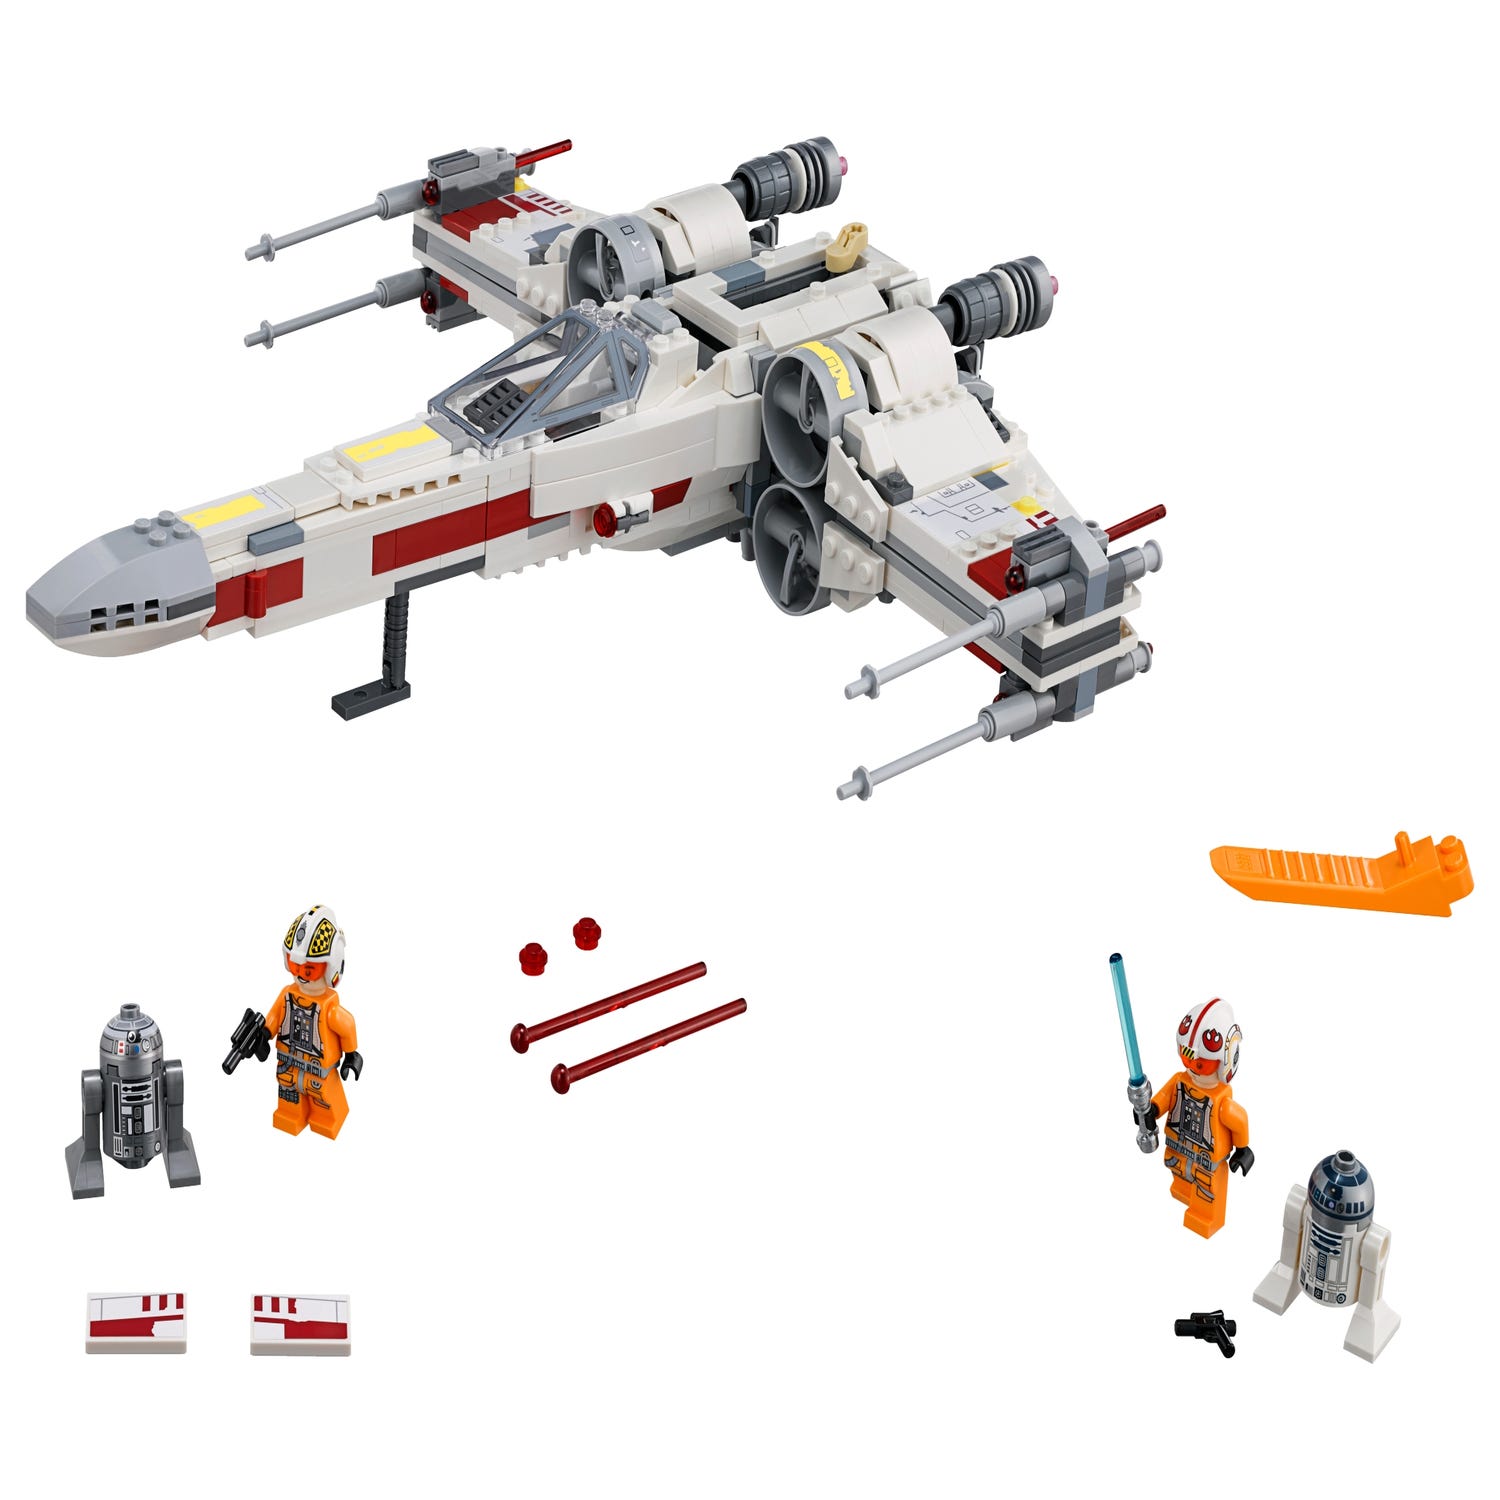 x wing starfighter 75218 star wars buy online at the official lego shop us x wing starfighter 75218 star wars buy online at the official lego shop us